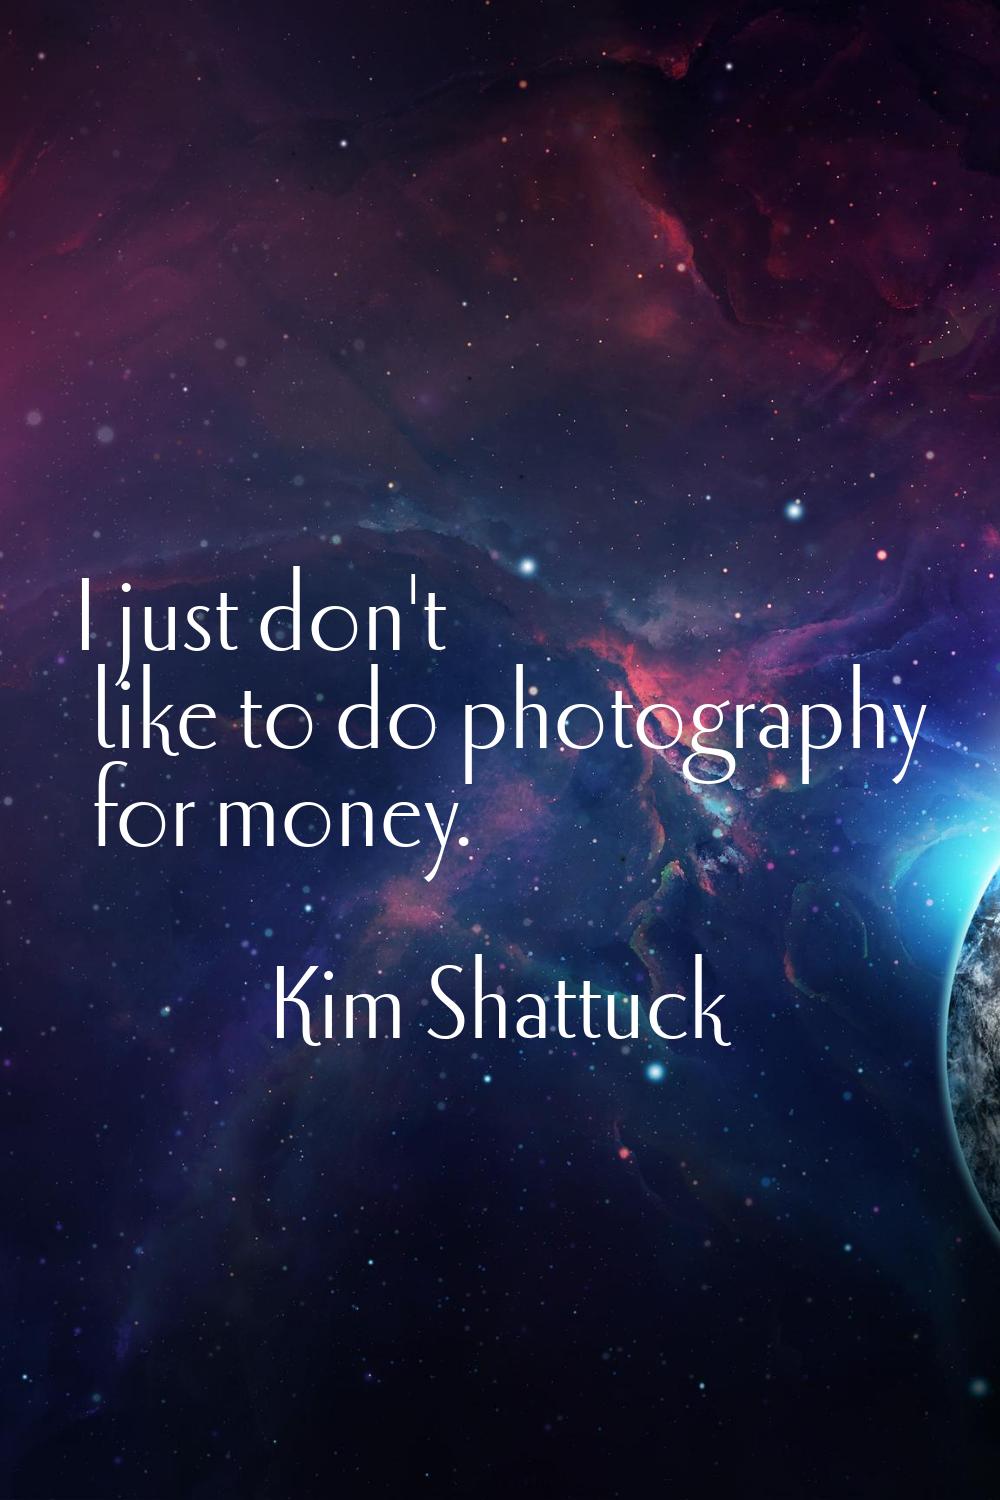 I just don't like to do photography for money.